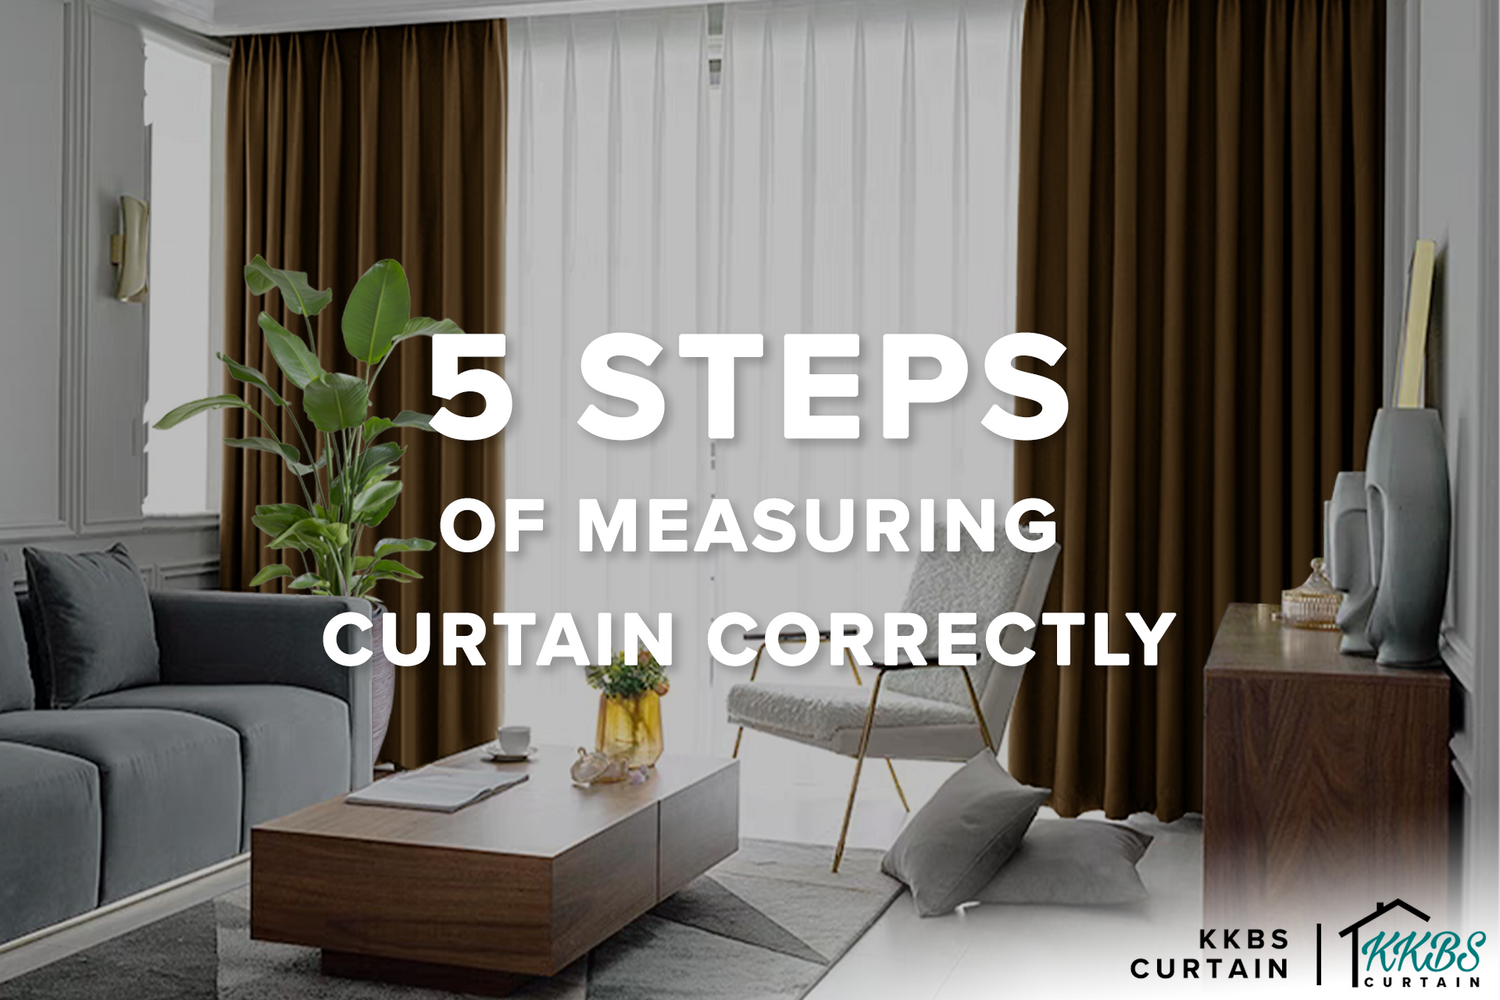 5 Steps of Measuring Curtain Correctly